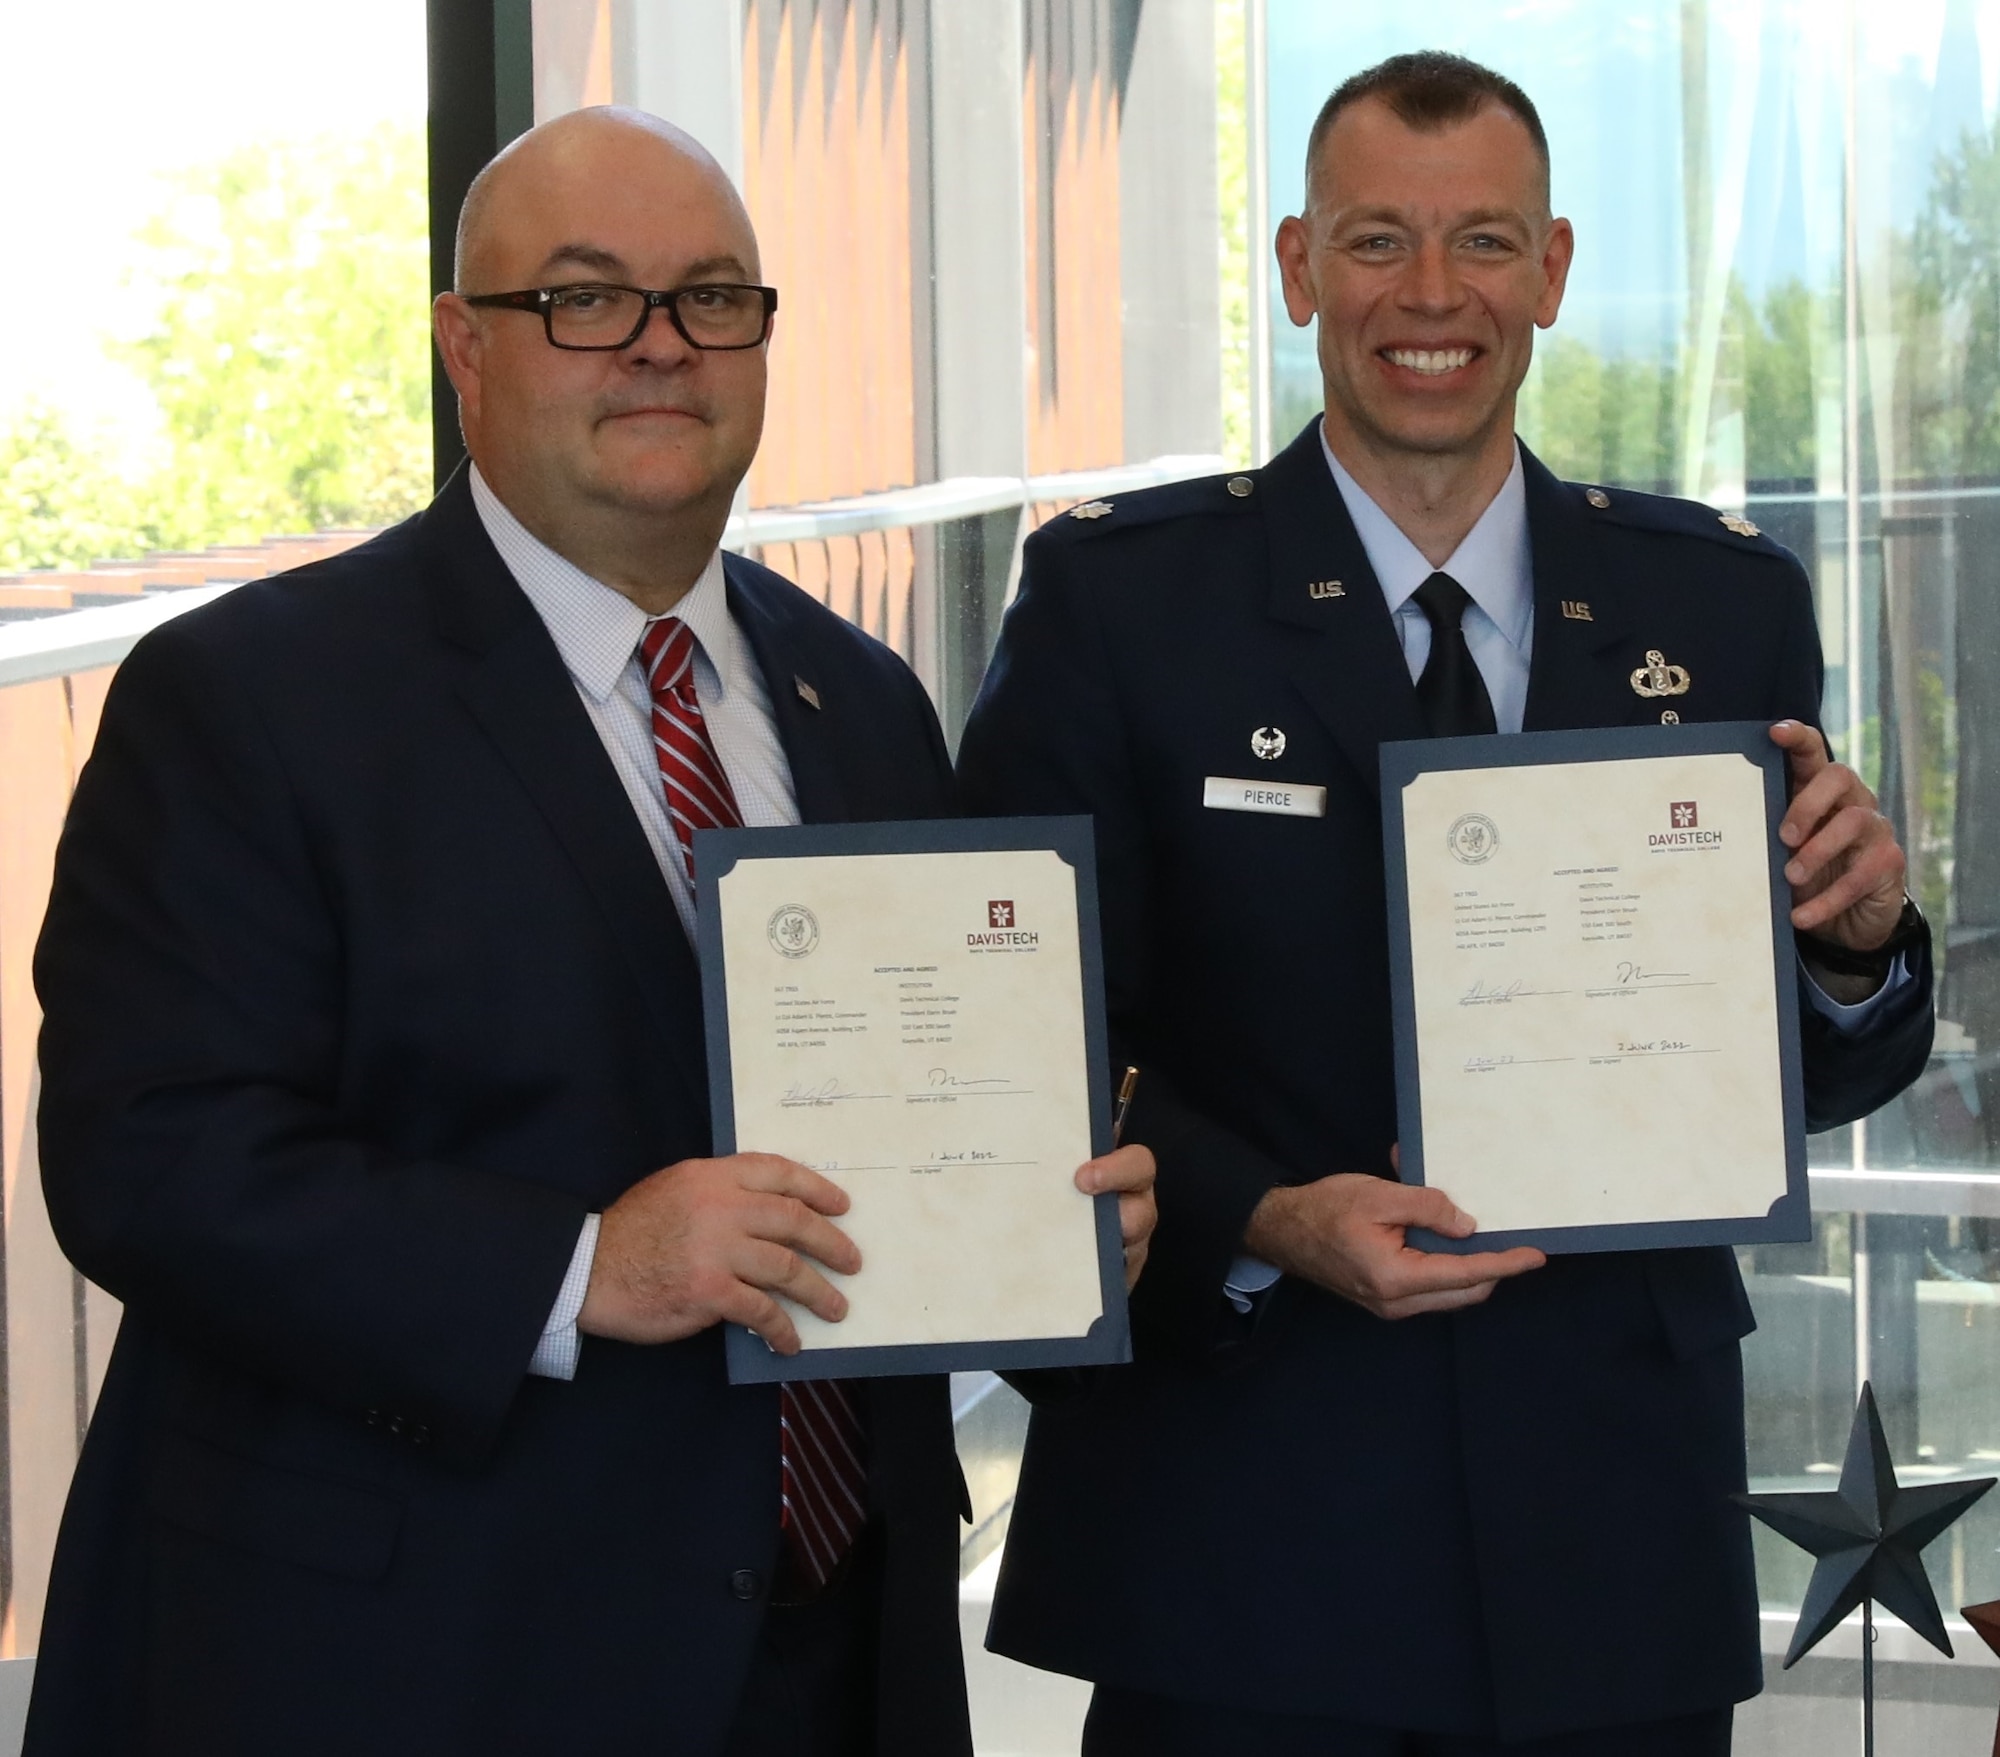 Davis Technical College president Darrin Brush and Lt. Col. Adam Pierce, 367th Training Support Squadron commander display the educational and professional develop partnership agreement that customizes formal training for 367th TRSS members